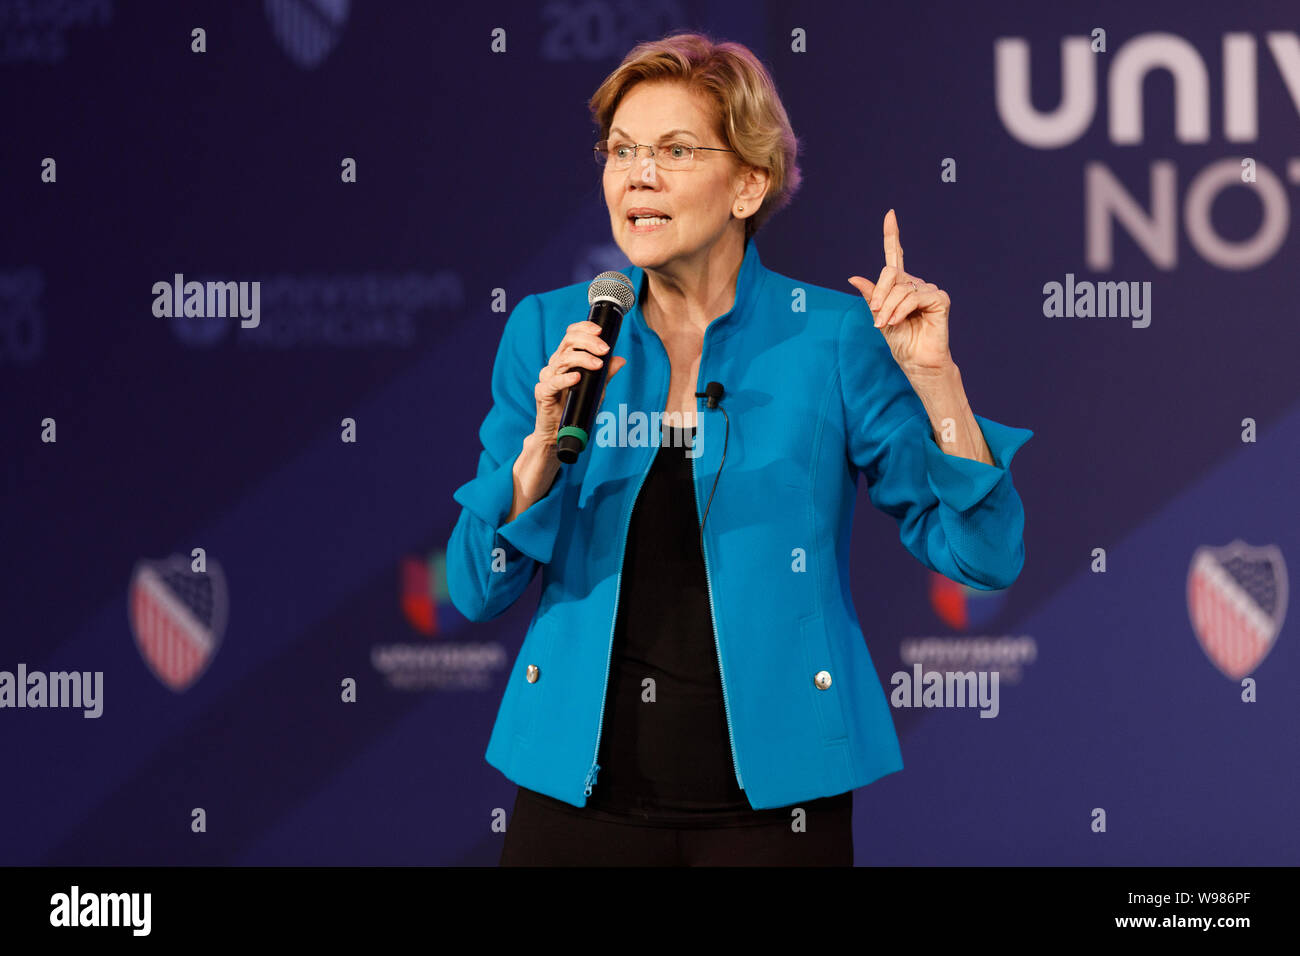 Senator Elizabeth Warren, a Democrat from Massachusetts and 2020 presidential candidate, speaks to the crowd during an event Stock Photo